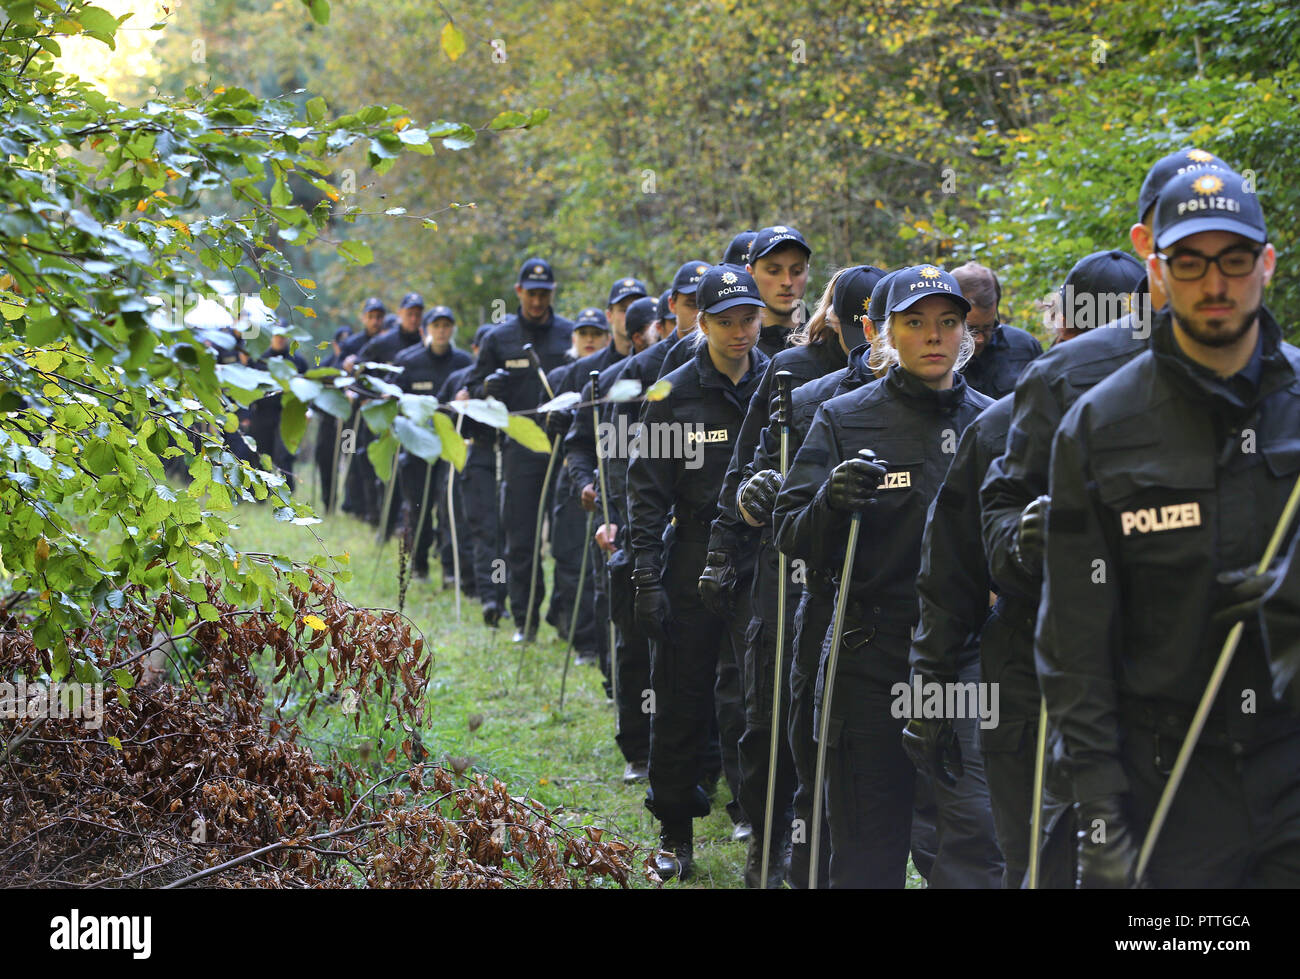 Burgsinn, Bavaria. 11th Oct, 2018. A hundred police officers are walking through a forest. In connection with the disappearance of a four-time mother thirteen years ago, police searched a forest area in Lower Franconia on Thursday morning. Credit: Karl-Josef Hildenbrand/dpa/Alamy Live News Stock Photo